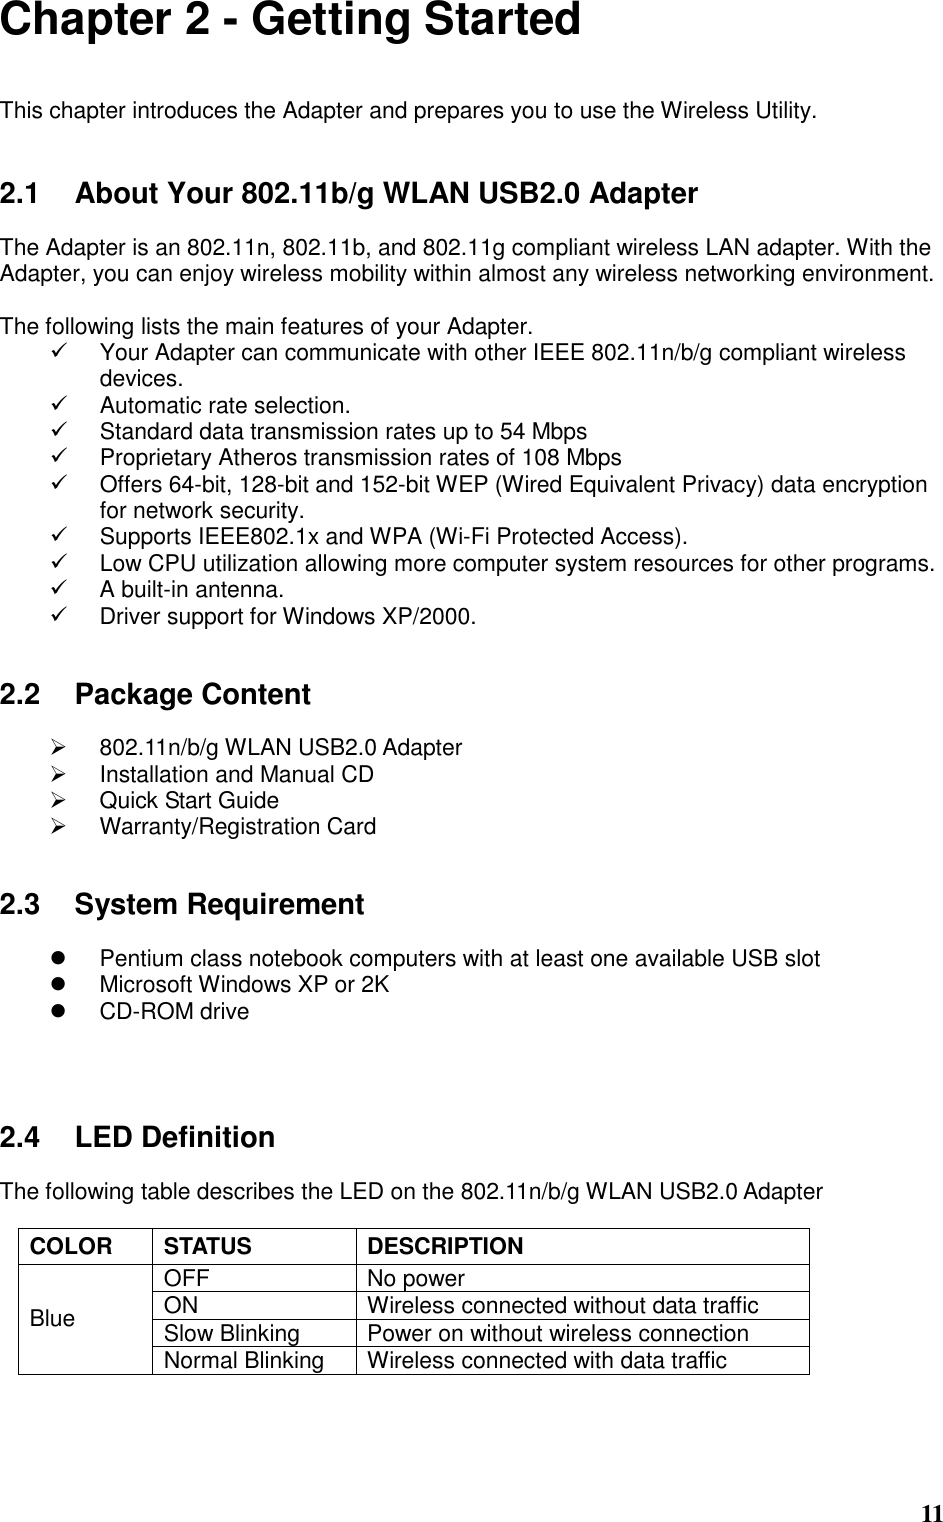  11 Chapter 2 - Getting Started  This chapter introduces the Adapter and prepares you to use the Wireless Utility.   2.1  About Your 802.11b/g WLAN USB2.0 Adapter  The Adapter is an 802.11n, 802.11b, and 802.11g compliant wireless LAN adapter. With the Adapter, you can enjoy wireless mobility within almost any wireless networking environment.  The following lists the main features of your Adapter.   Your Adapter can communicate with other IEEE 802.11n/b/g compliant wireless devices.   Automatic rate selection.   Standard data transmission rates up to 54 Mbps   Proprietary Atheros transmission rates of 108 Mbps   Offers 64-bit, 128-bit and 152-bit WEP (Wired Equivalent Privacy) data encryption for network security.   Supports IEEE802.1x and WPA (Wi-Fi Protected Access).   Low CPU utilization allowing more computer system resources for other programs.   A built-in antenna.   Driver support for Windows XP/2000.   2.2  Package Content    802.11n/b/g WLAN USB2.0 Adapter   Installation and Manual CD   Quick Start Guide   Warranty/Registration Card   2.3  System Requirement    Pentium class notebook computers with at least one available USB slot   Microsoft Windows XP or 2K   CD-ROM drive     2.4  LED Definition  The following table describes the LED on the 802.11n/b/g WLAN USB2.0 Adapter  COLOR  STATUS  DESCRIPTION OFF  No power ON  Wireless connected without data traffic Slow Blinking  Power on without wireless connection Blue Normal Blinking  Wireless connected with data traffic    